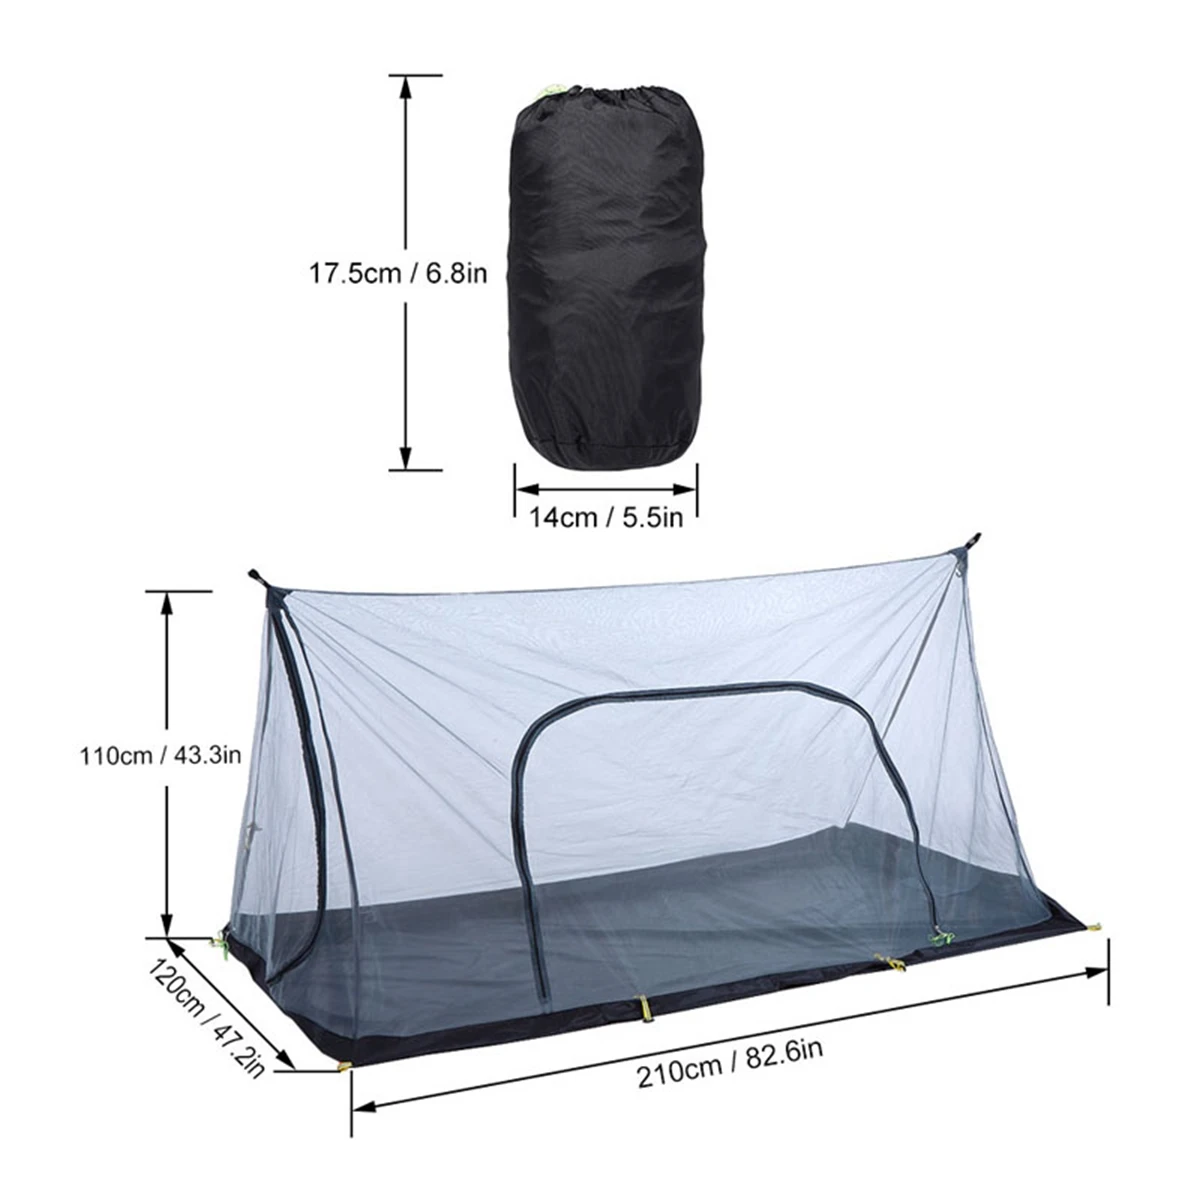 

1-2 Person Outdoor Camping Tent Waterproof Camping Tent Instant Setup with Sun Shade Tent Family Traveling Camping Activity